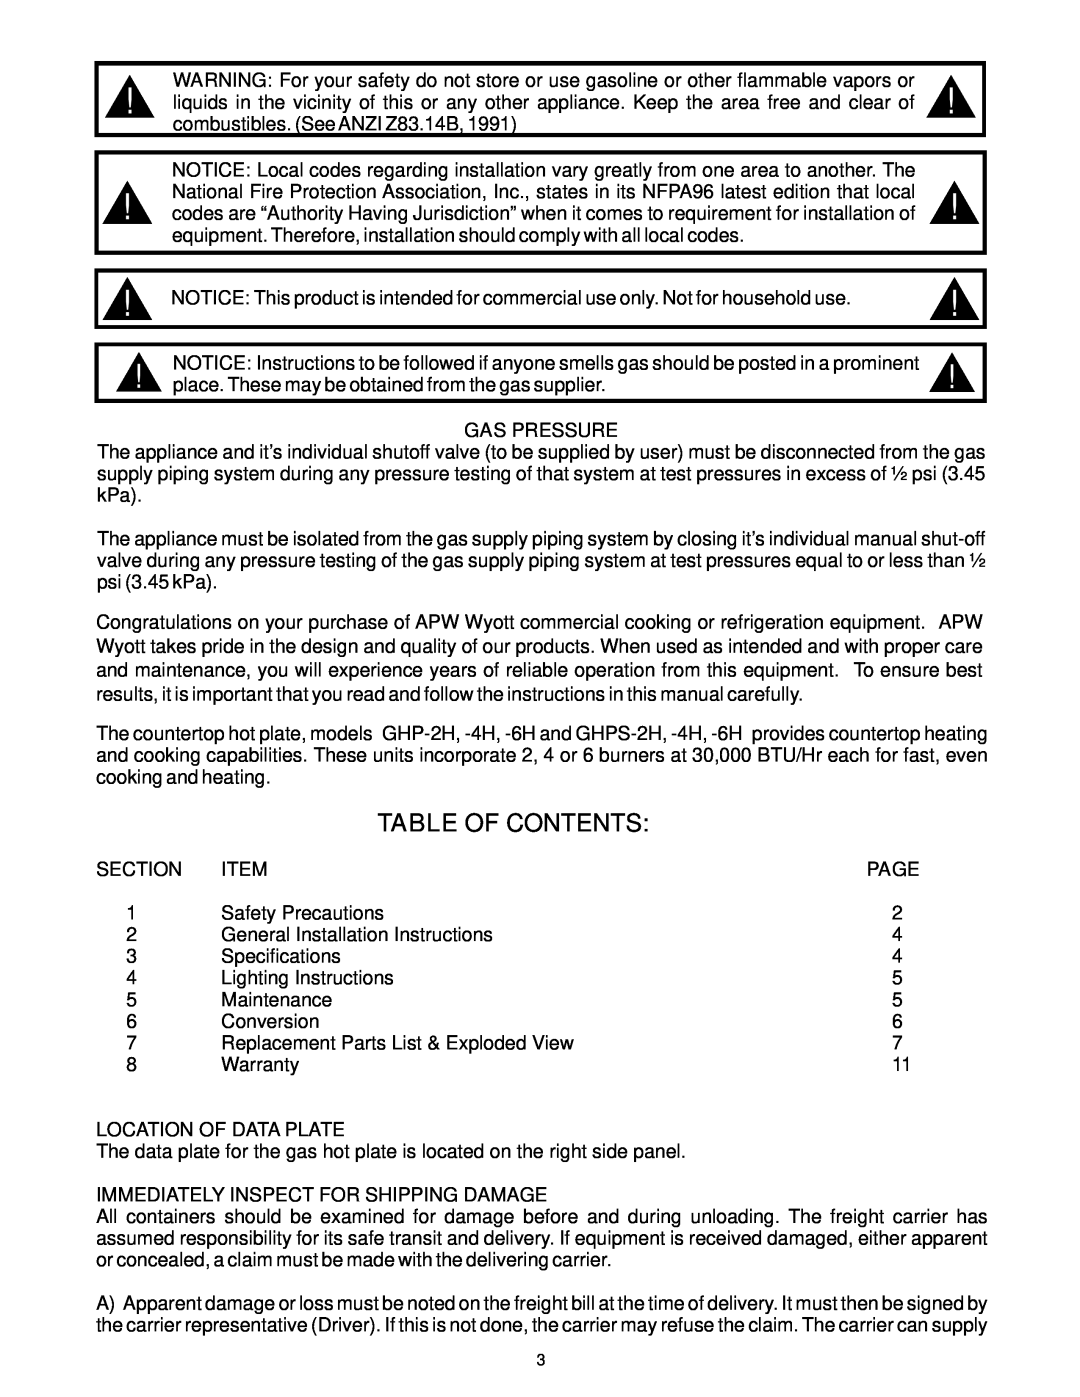 APW Wyott GHP-2H operating instructions Table Of Contents, Gas Pressure, place. These may be obtained from the gas supplier 